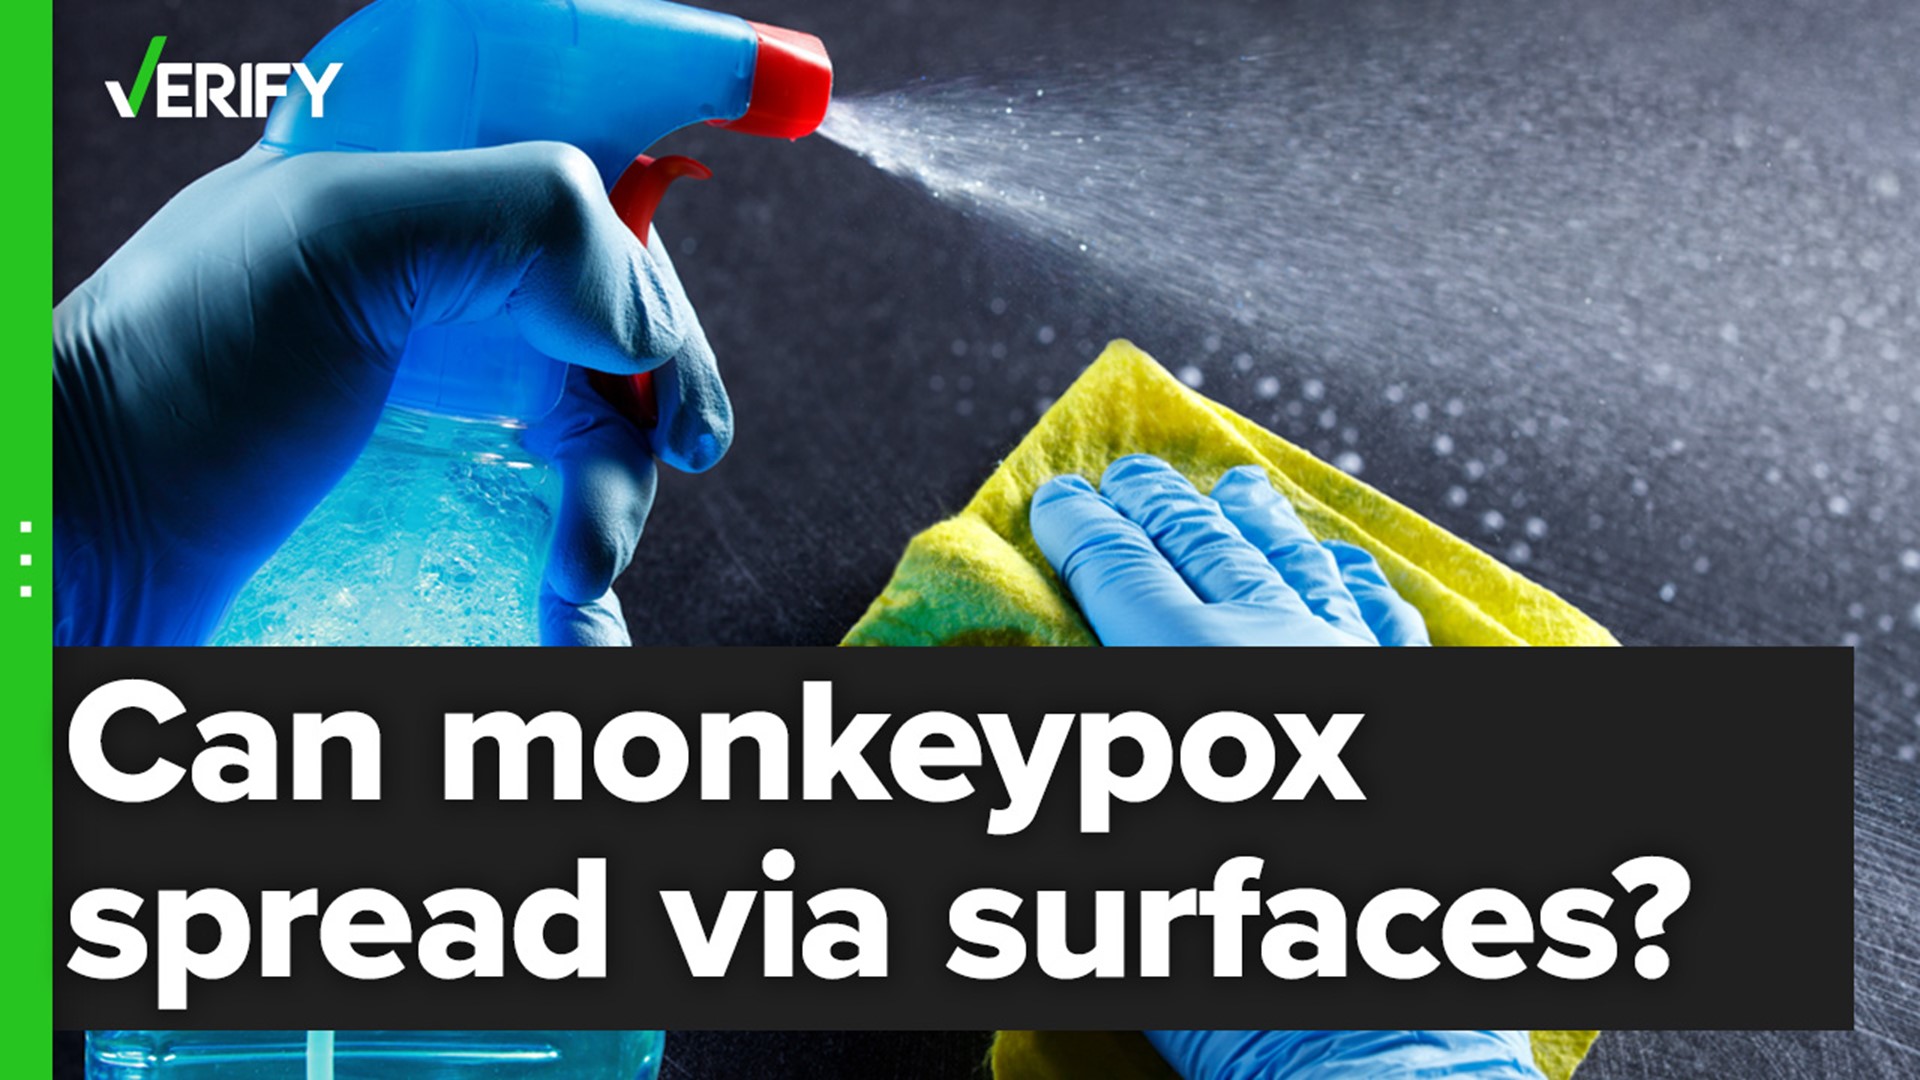 While it is possible for the monkeypox virus to spread by touching contaminated surfaces, health officials say the current risk to the public is low.